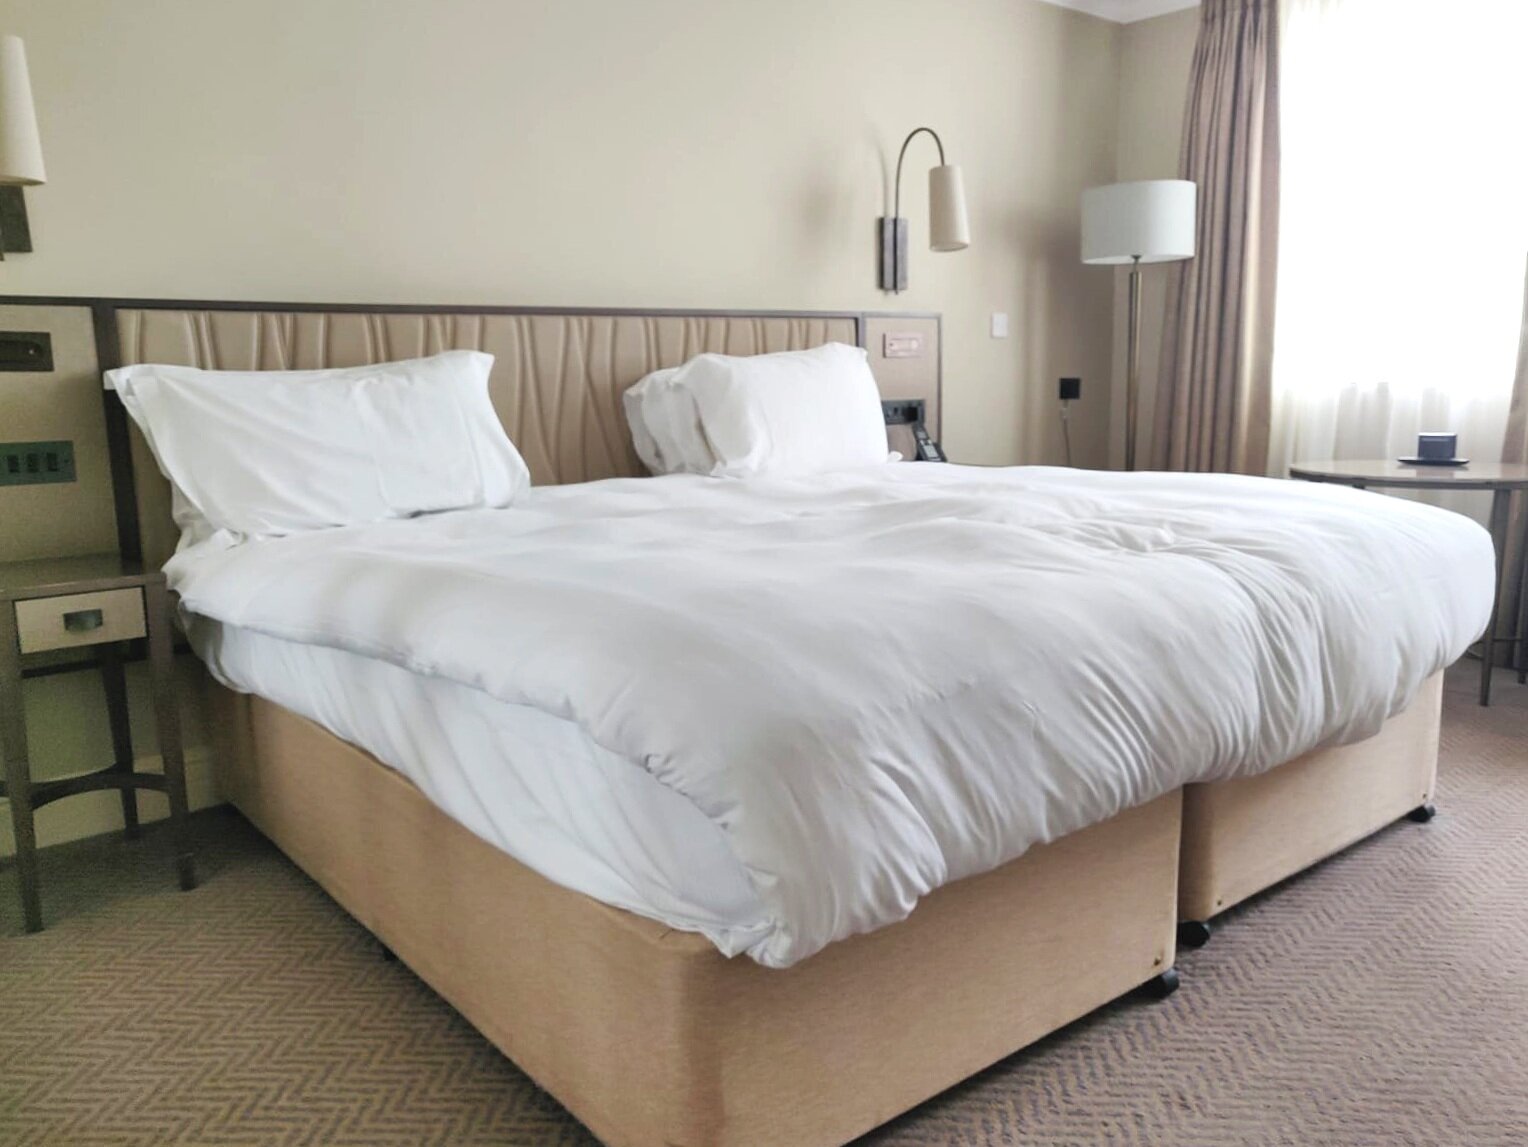 Castle Hotel Windsor rooms review